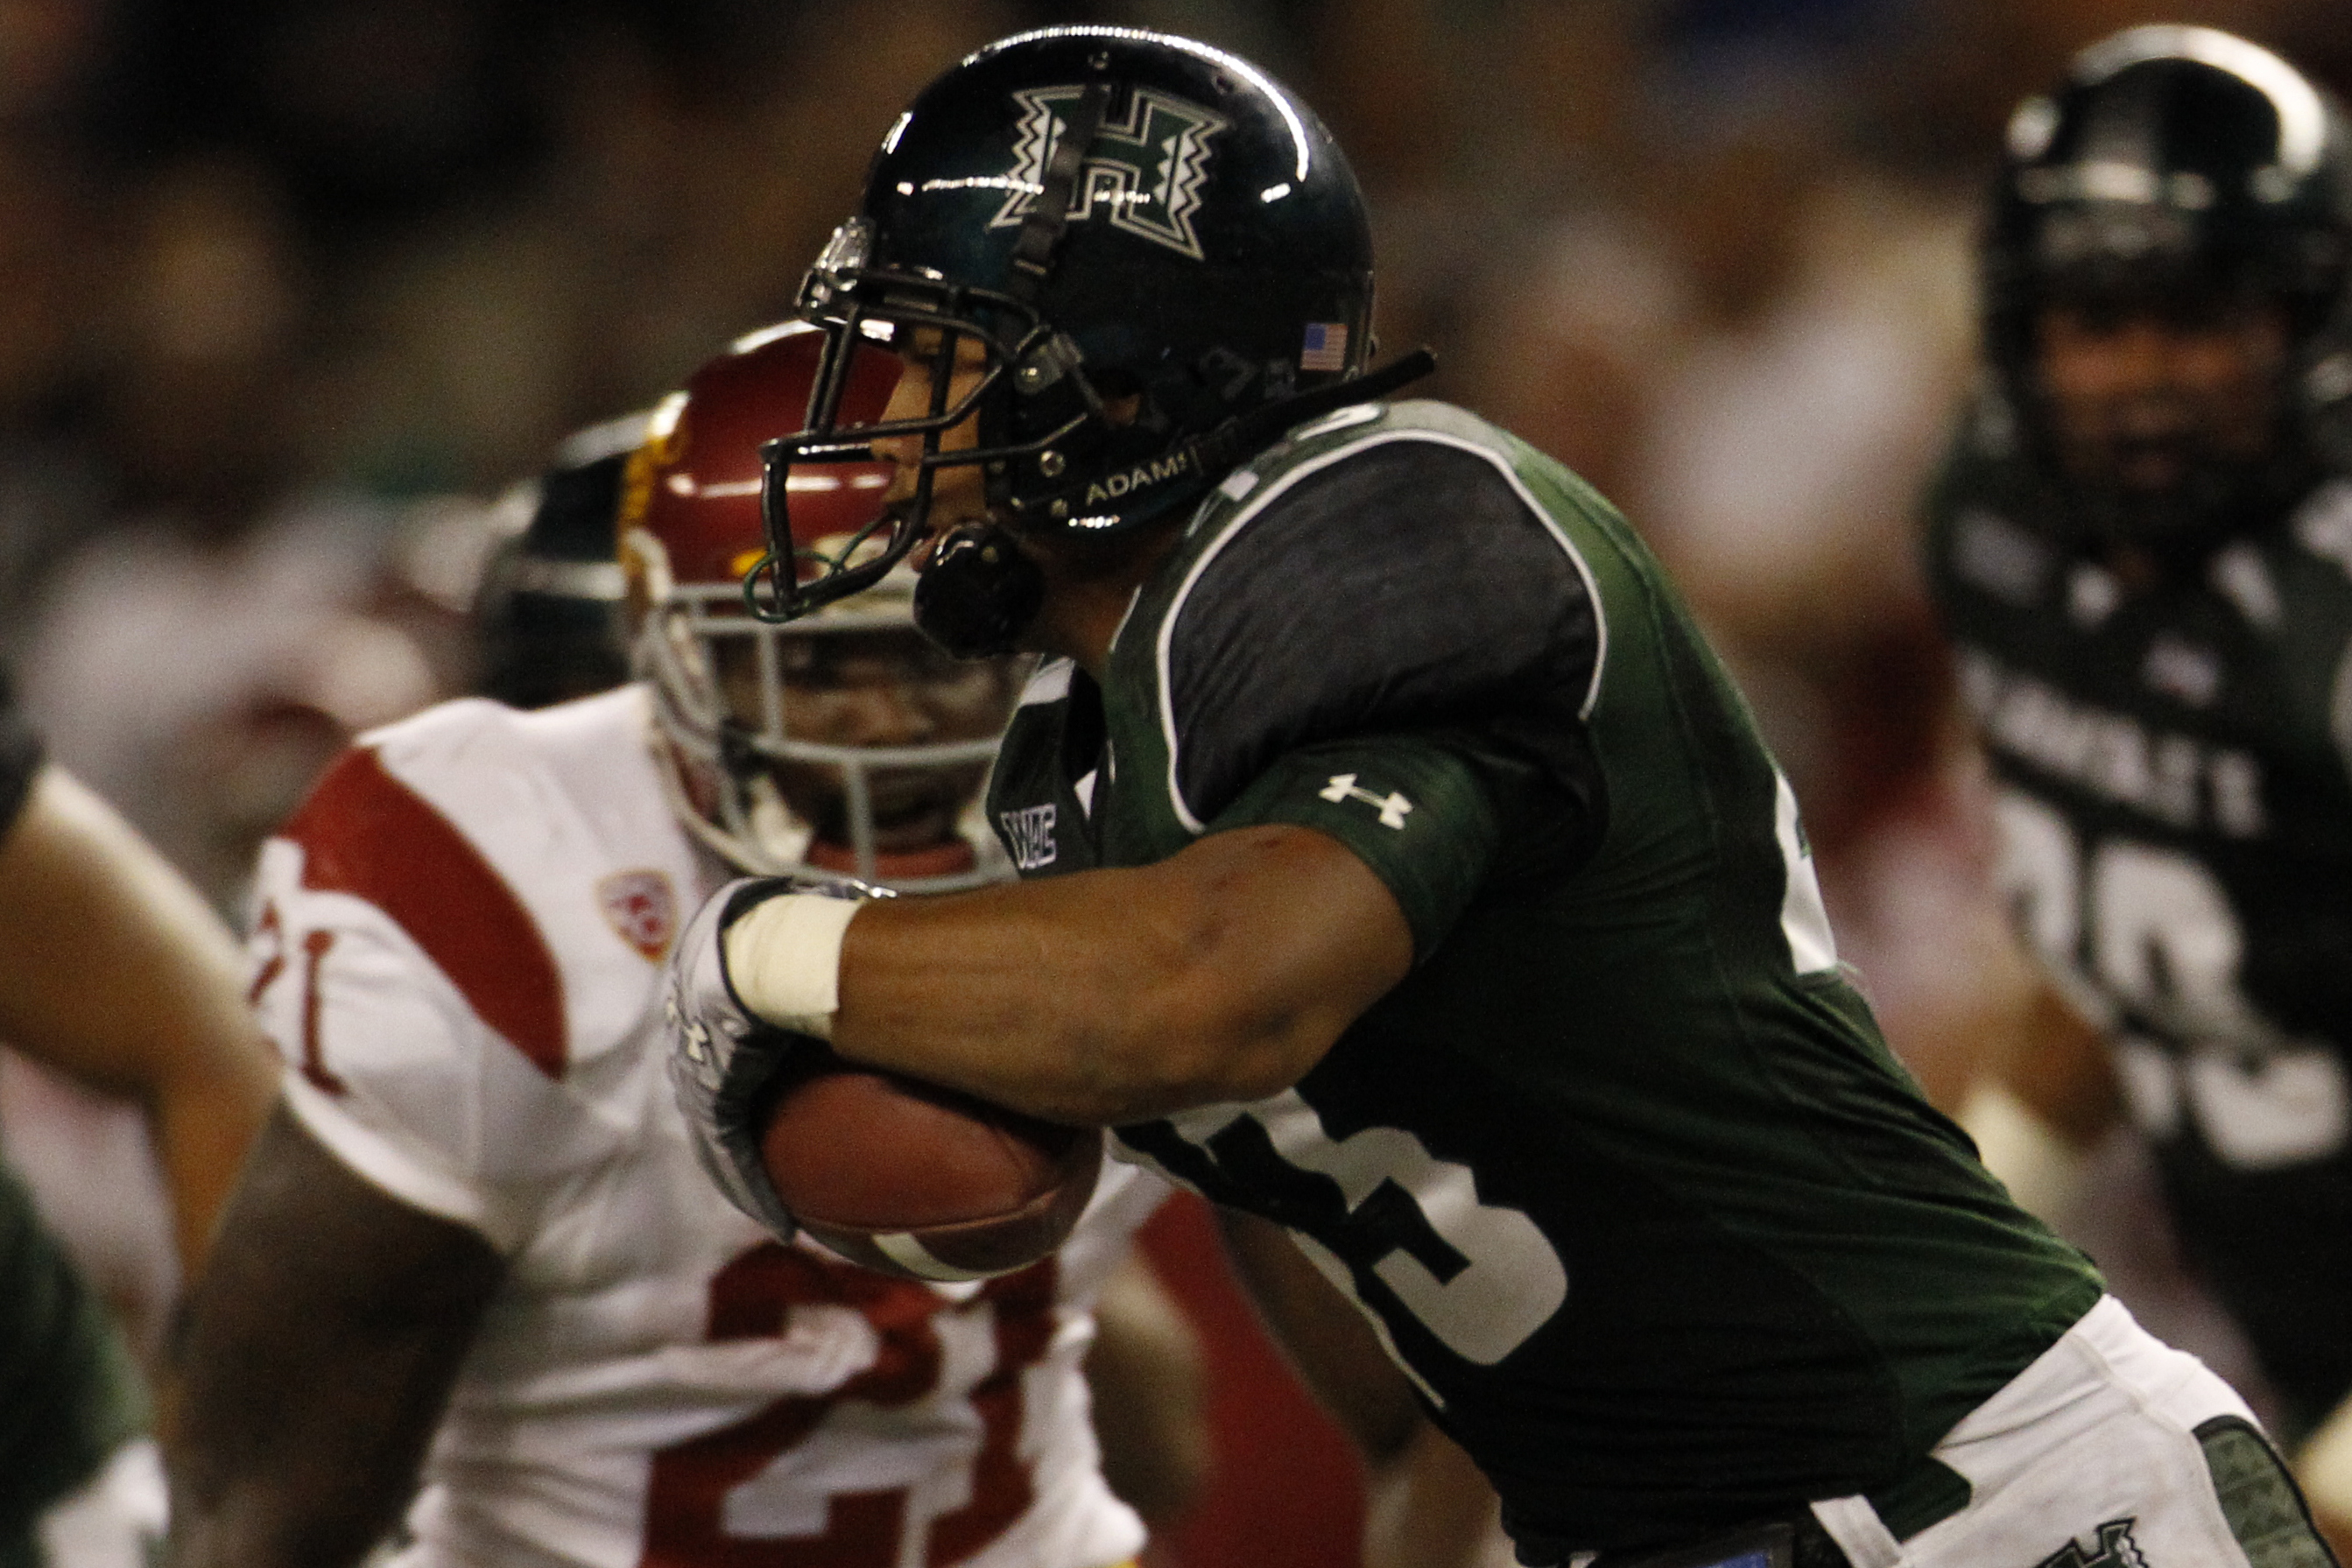 HONOLULU - SEPTEMBER 2:  Mana Silva of the University of Hawaii Warriors runs the ball after a USC fumble during second half action at Aloha Stadium September 2, 2010 in Honolulu, Hawaii. (Photo by Kent Nishimura/Getty Images)